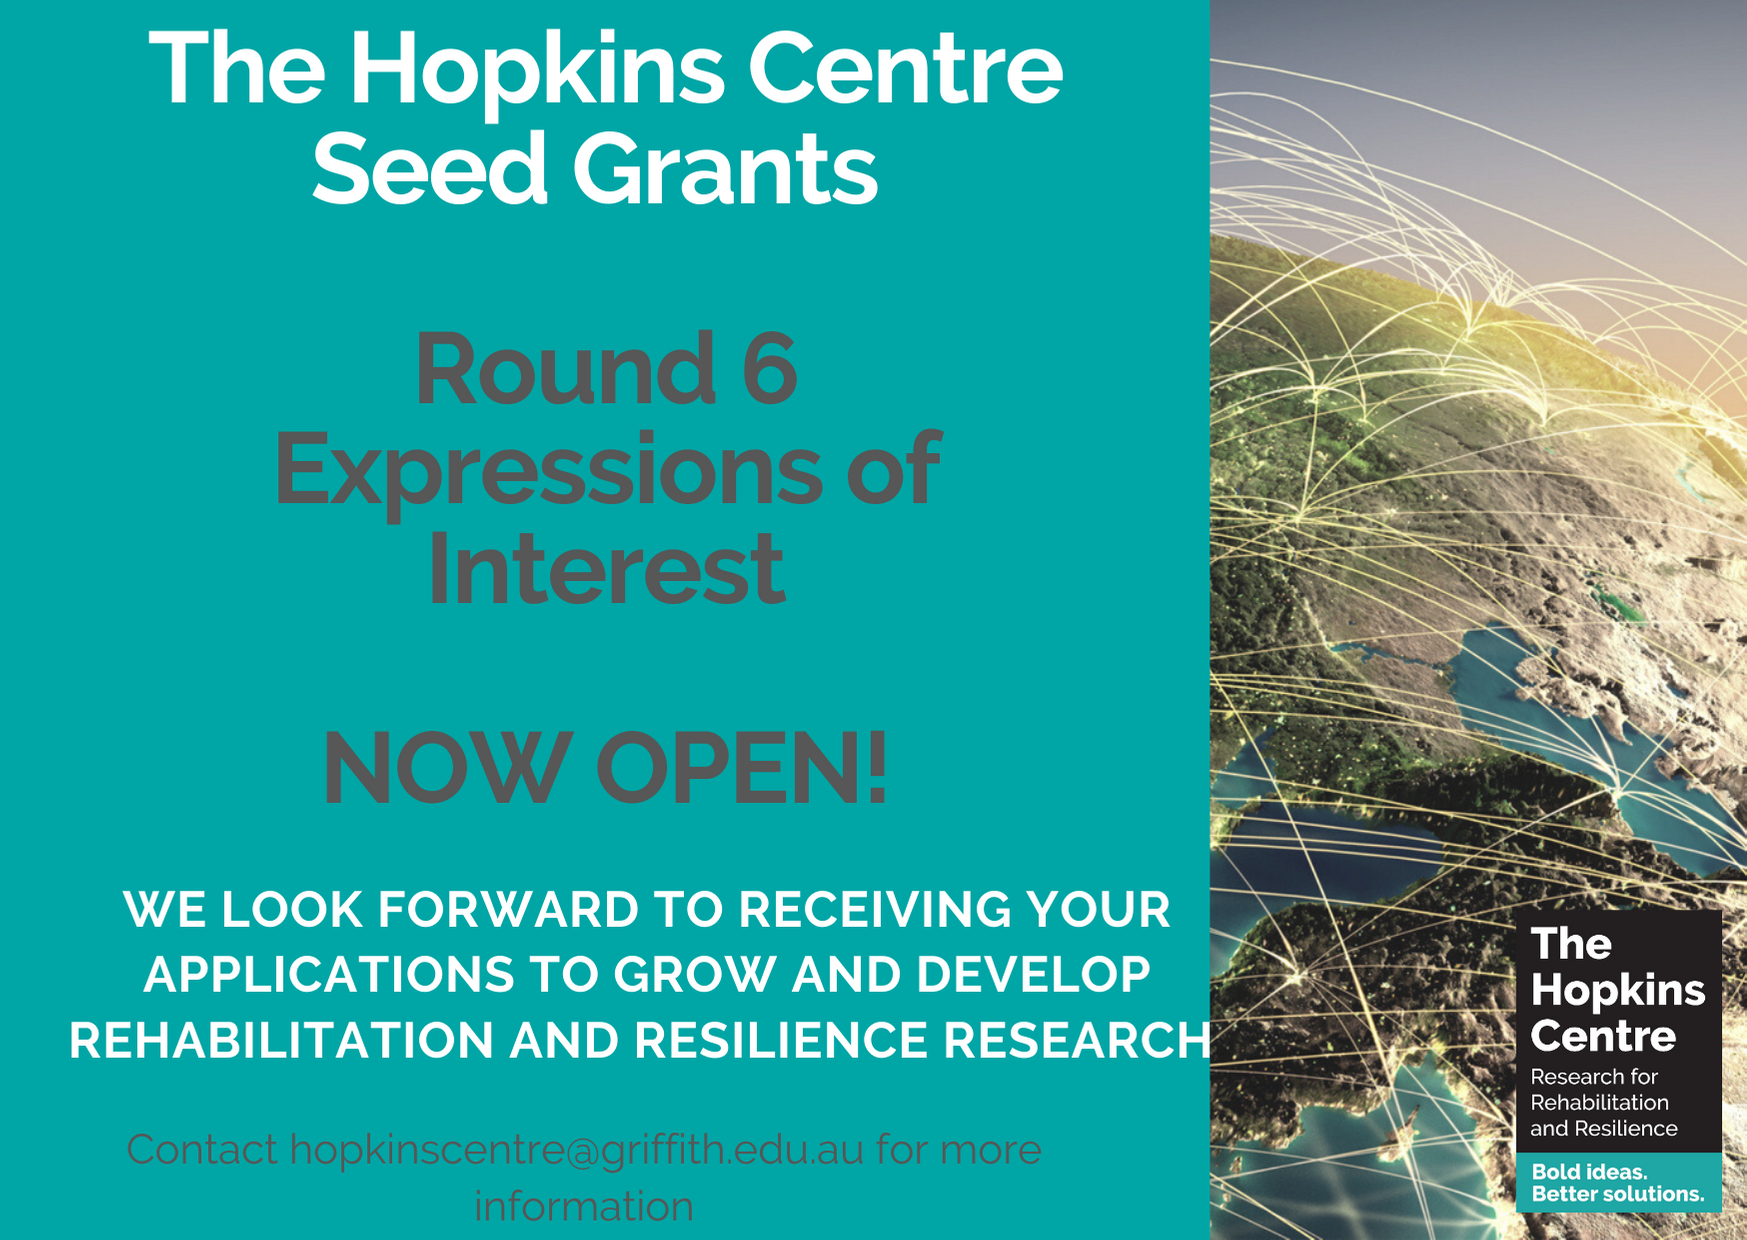 The Hopkins Centre Seed Grant image, announcing round 6 is now open and to submit applications to hopkinscentre@griffith.edu.au